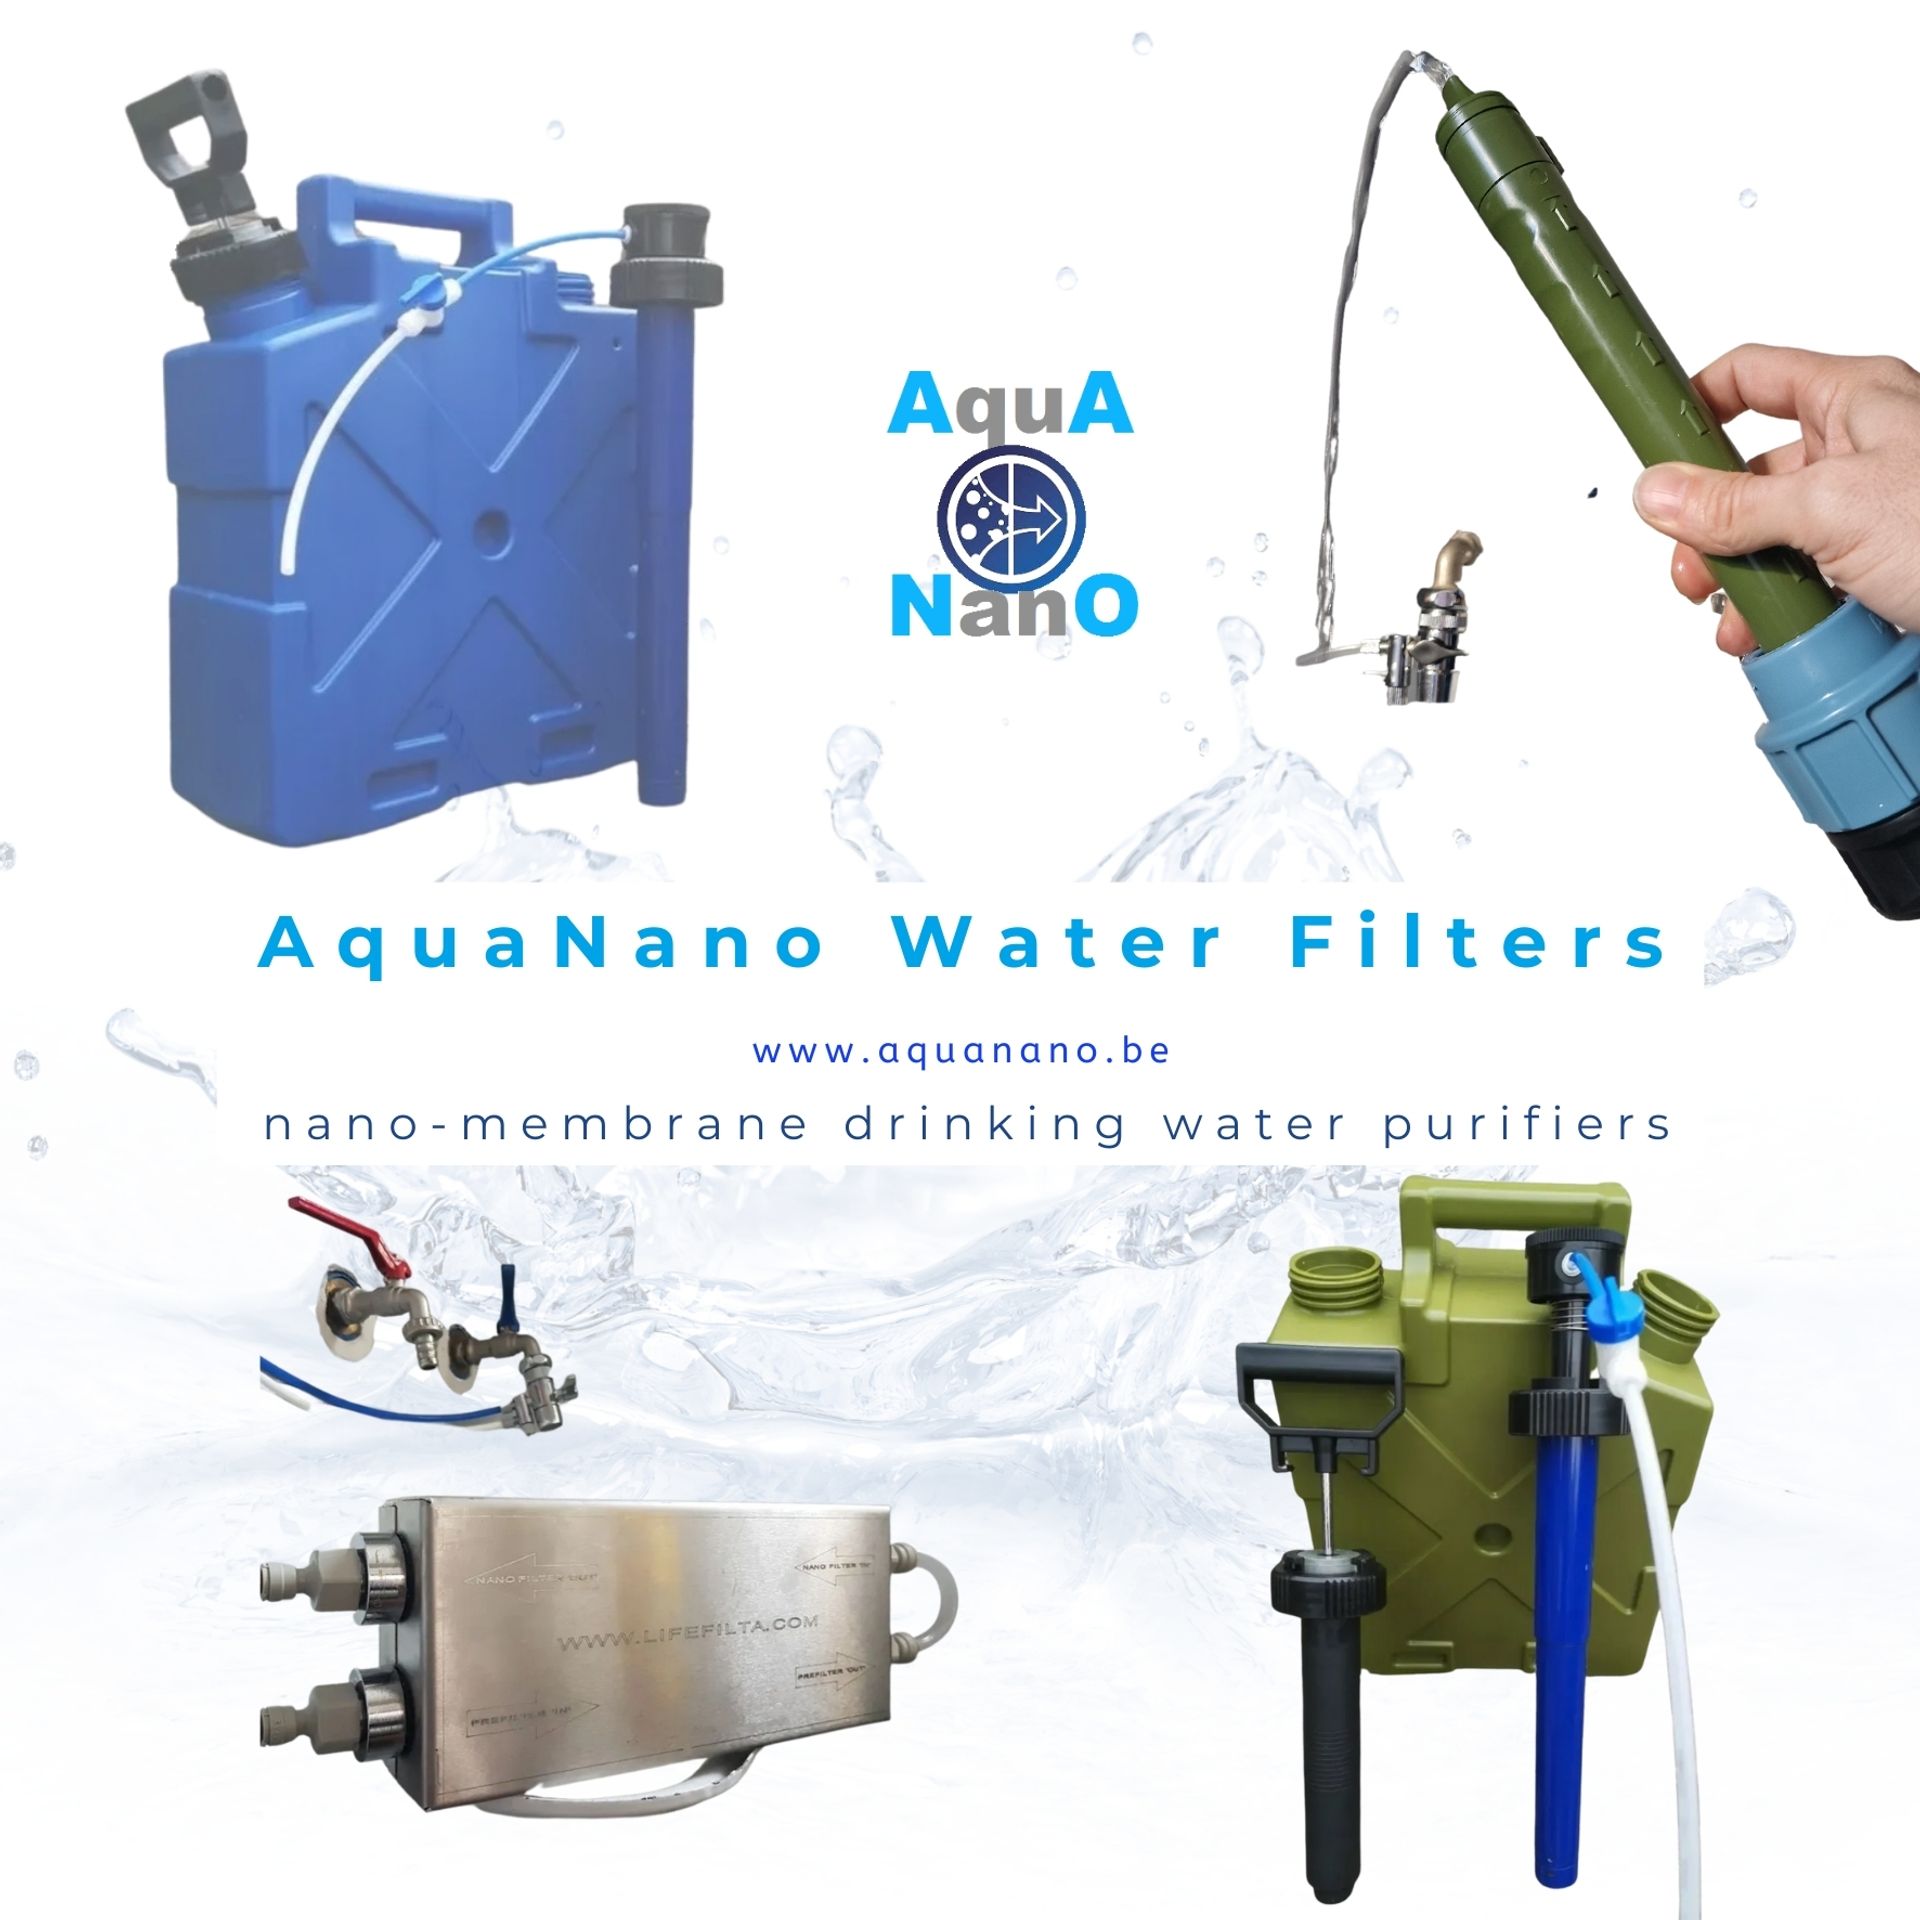 AquaNano Water Filters